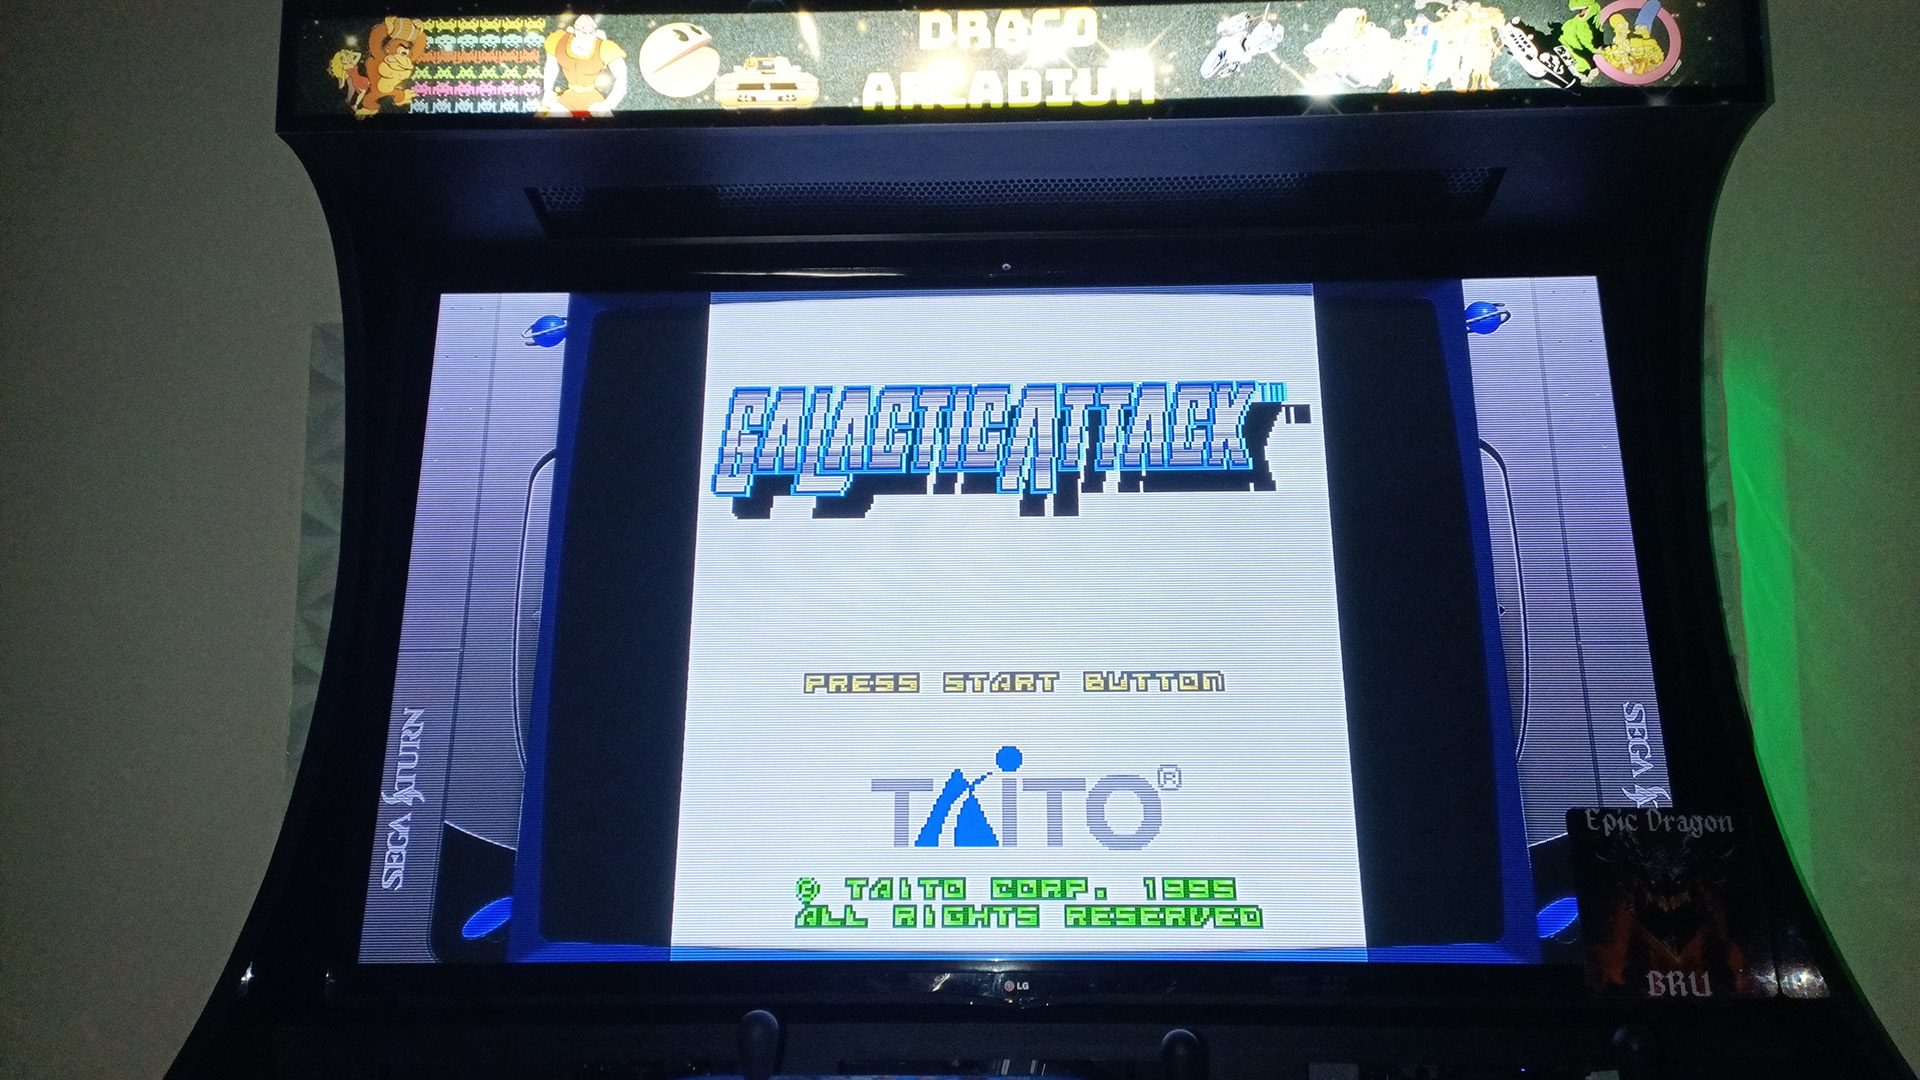 EpicDragon: Galactic Attack: Hard 1 (Sega Saturn Emulated) 816,900 points on 2022-08-14 14:46:24